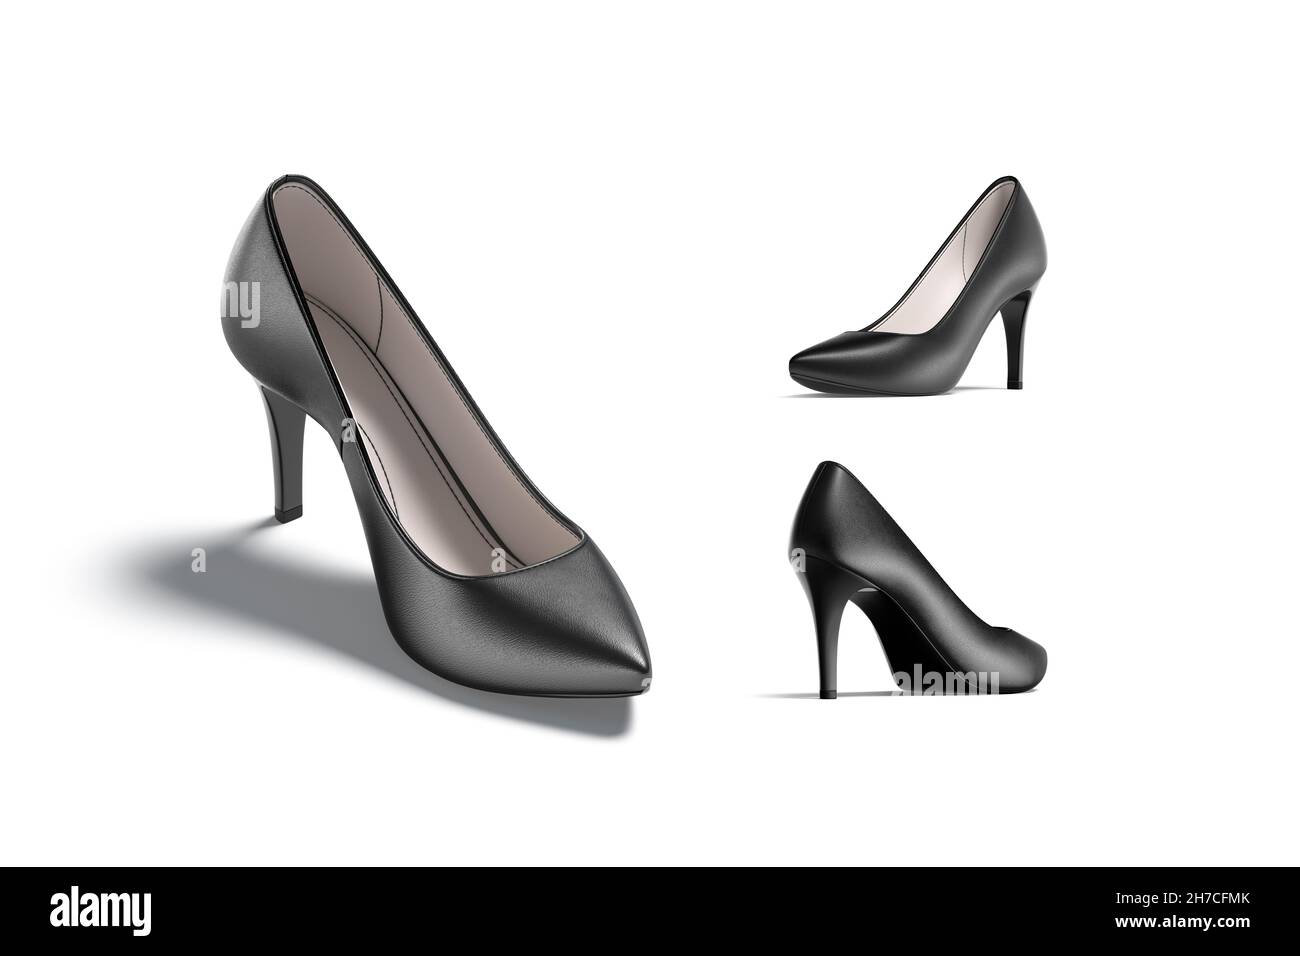 Blsnk black high heels shoes mock up, different views, 3d rendering. Empty casual leather boots with heelpiece mockup, isolated. Clear female spike he Stock Photo